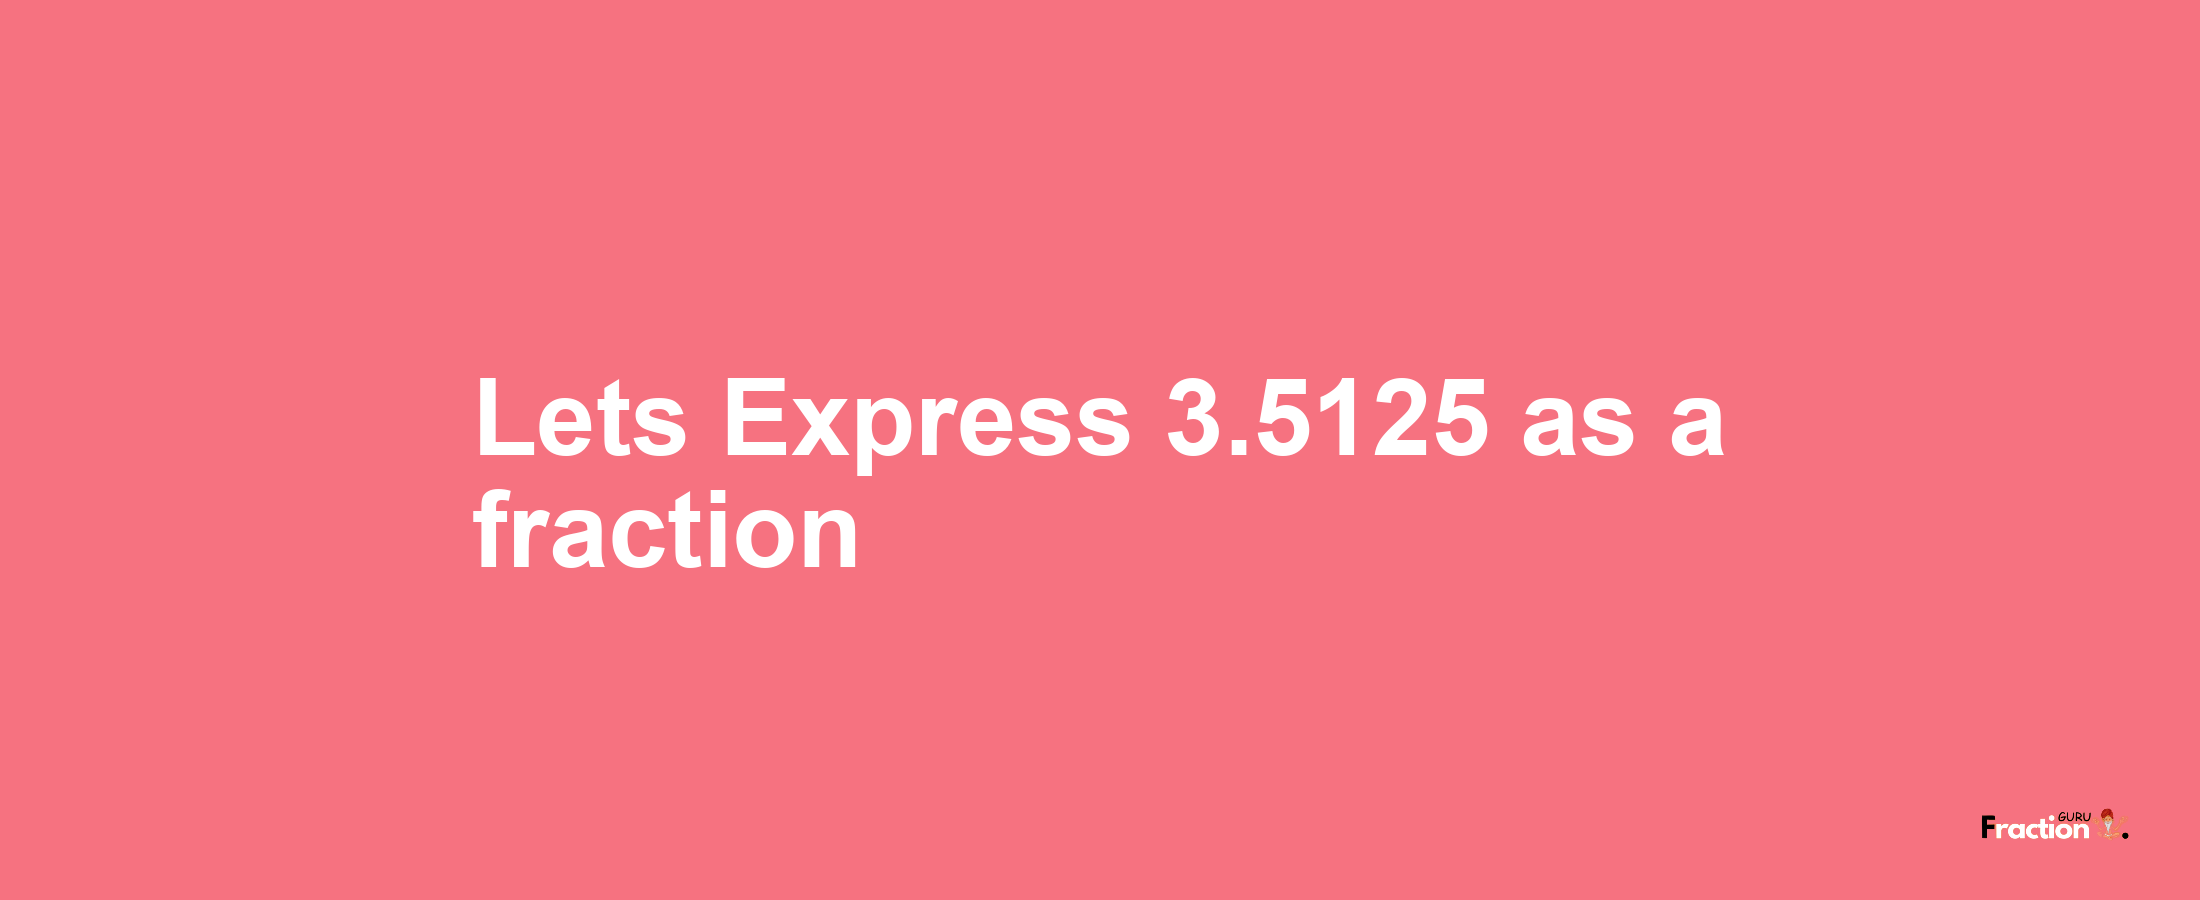 Lets Express 3.5125 as afraction